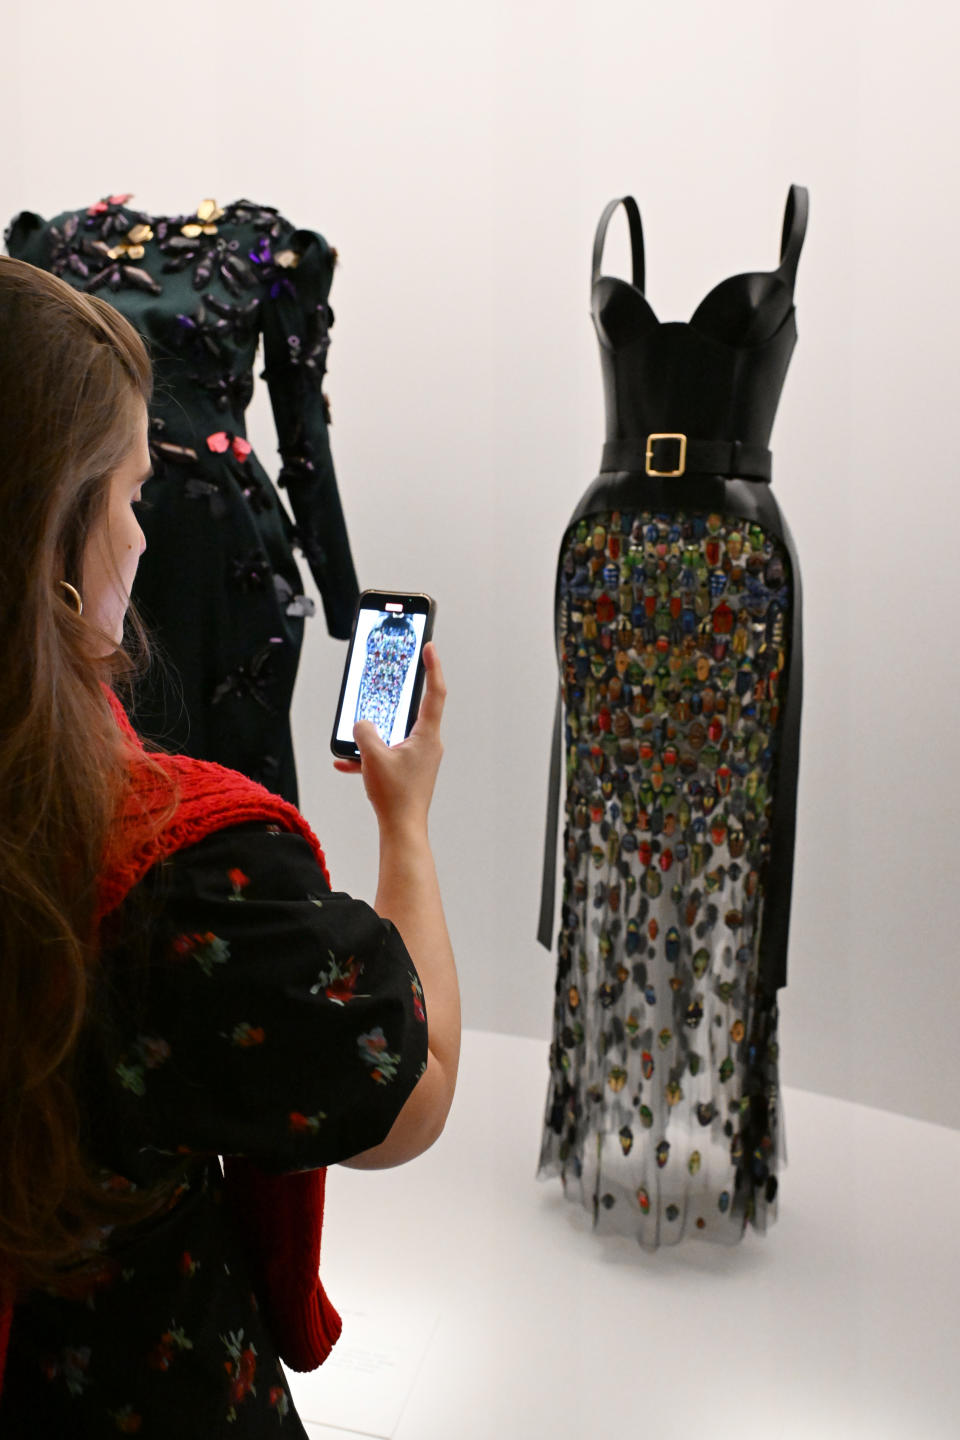 Woman takes photo of two dresses on display with her phone